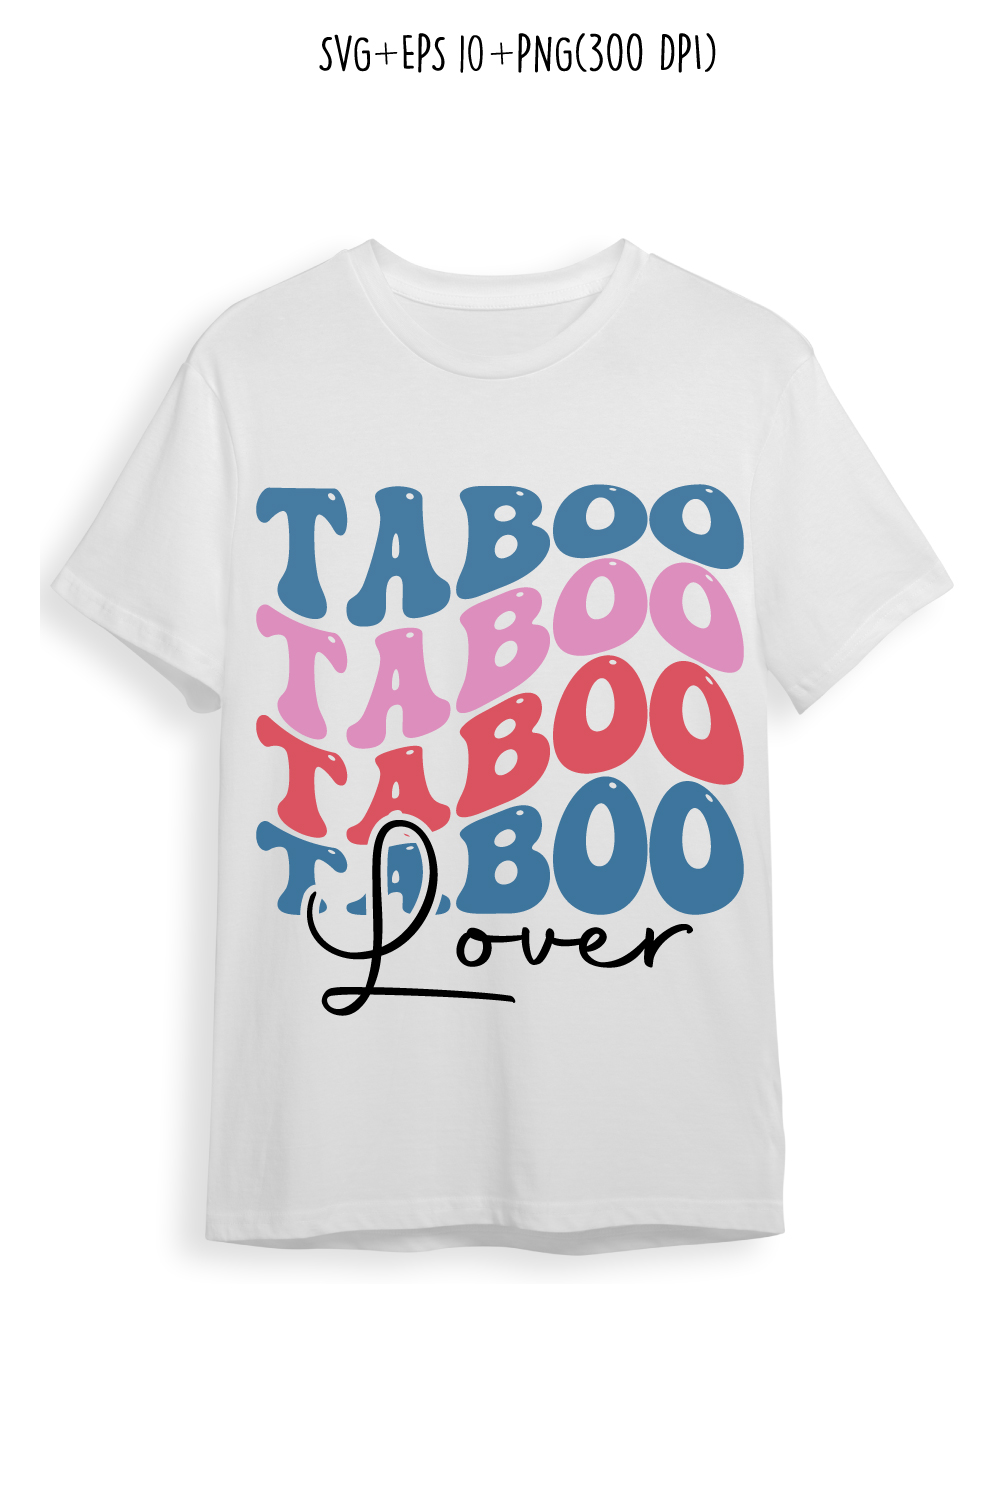 Taboo lover indoor game typography design for t-shirts, cards, frame artwork, phone cases, bags, mugs, stickers, tumblers, print, etc pinterest preview image.